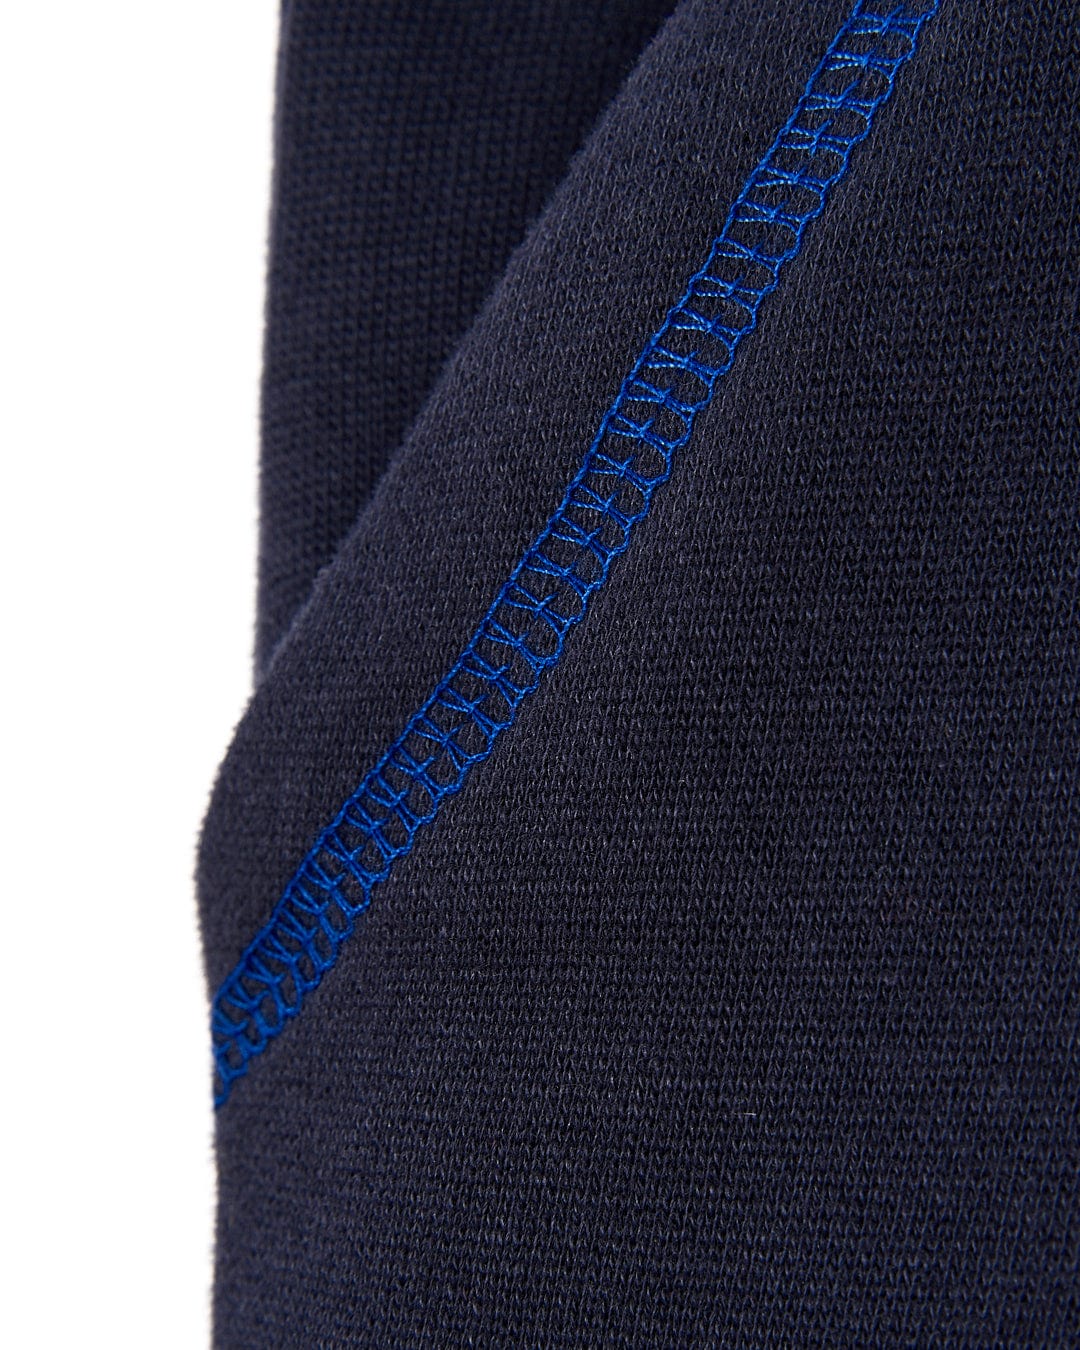 A close up of a Saltrock Morte Point Kids Sweat Shorts - Blue with blue stitching.